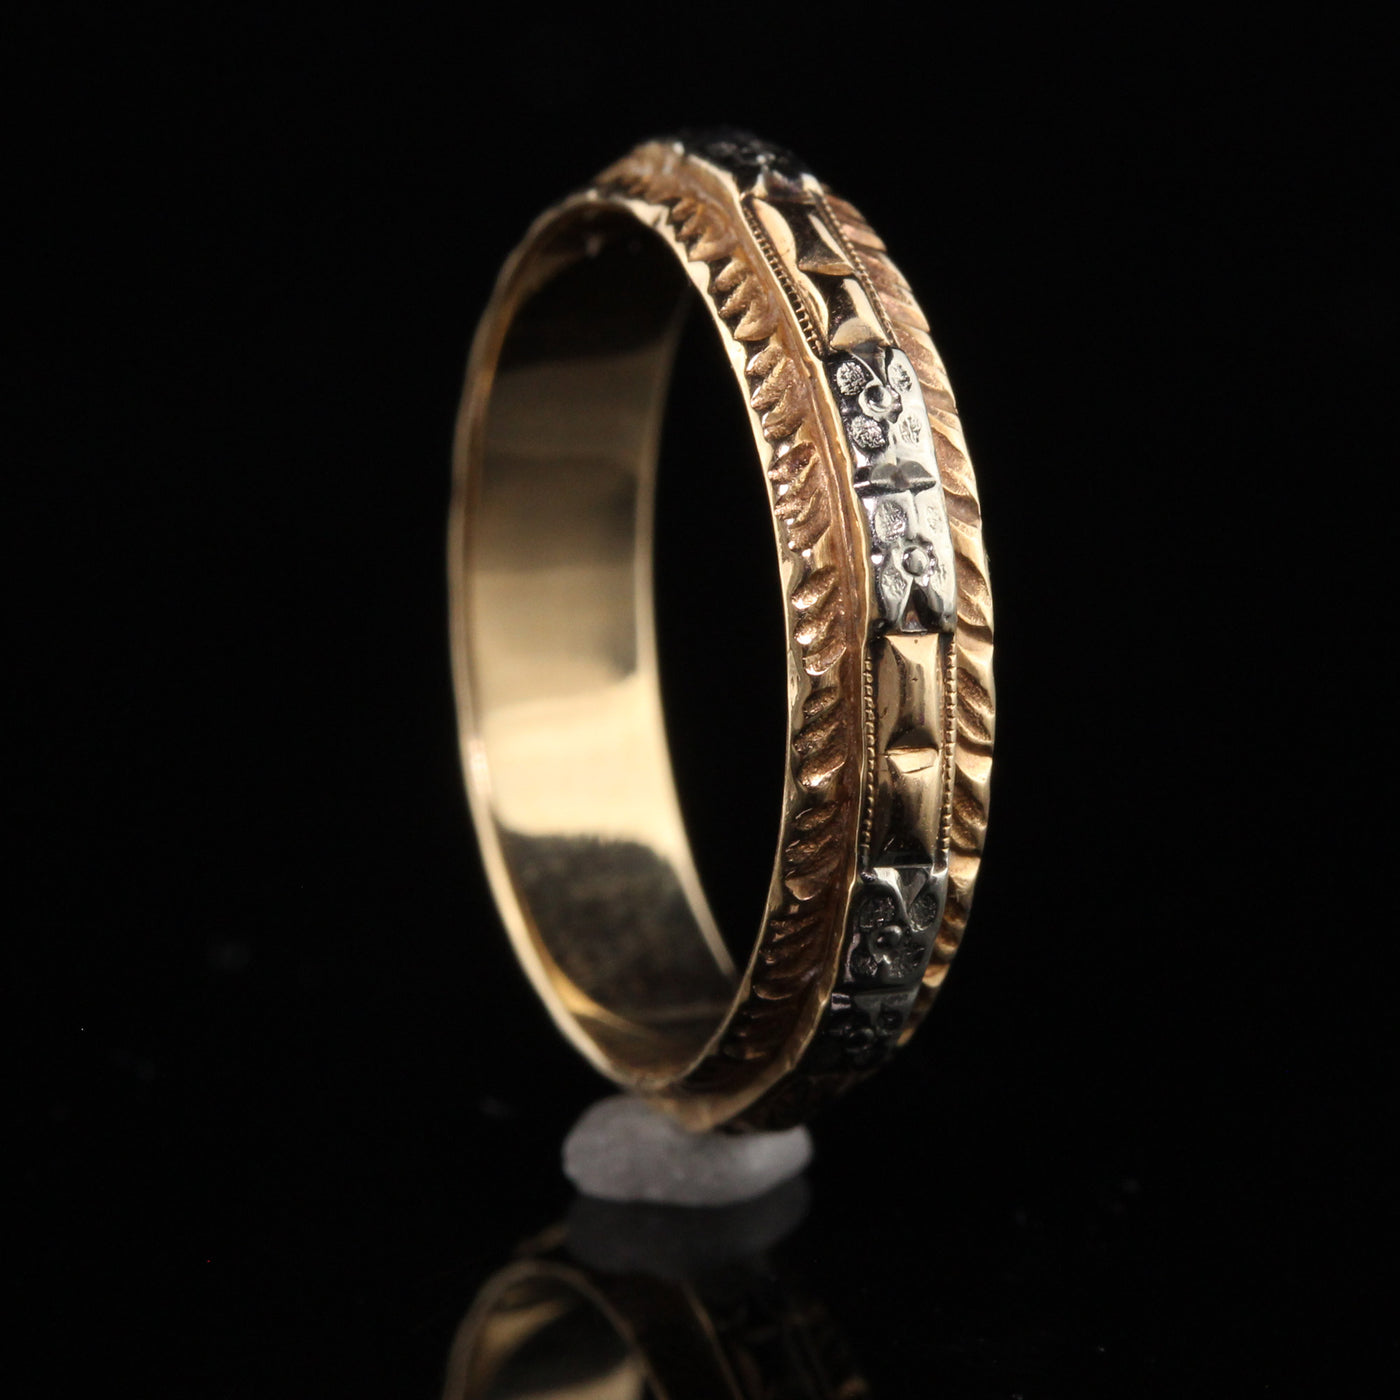 Antique Art Deco 14K and 18K Yellow Gold Engraved Wedding Band